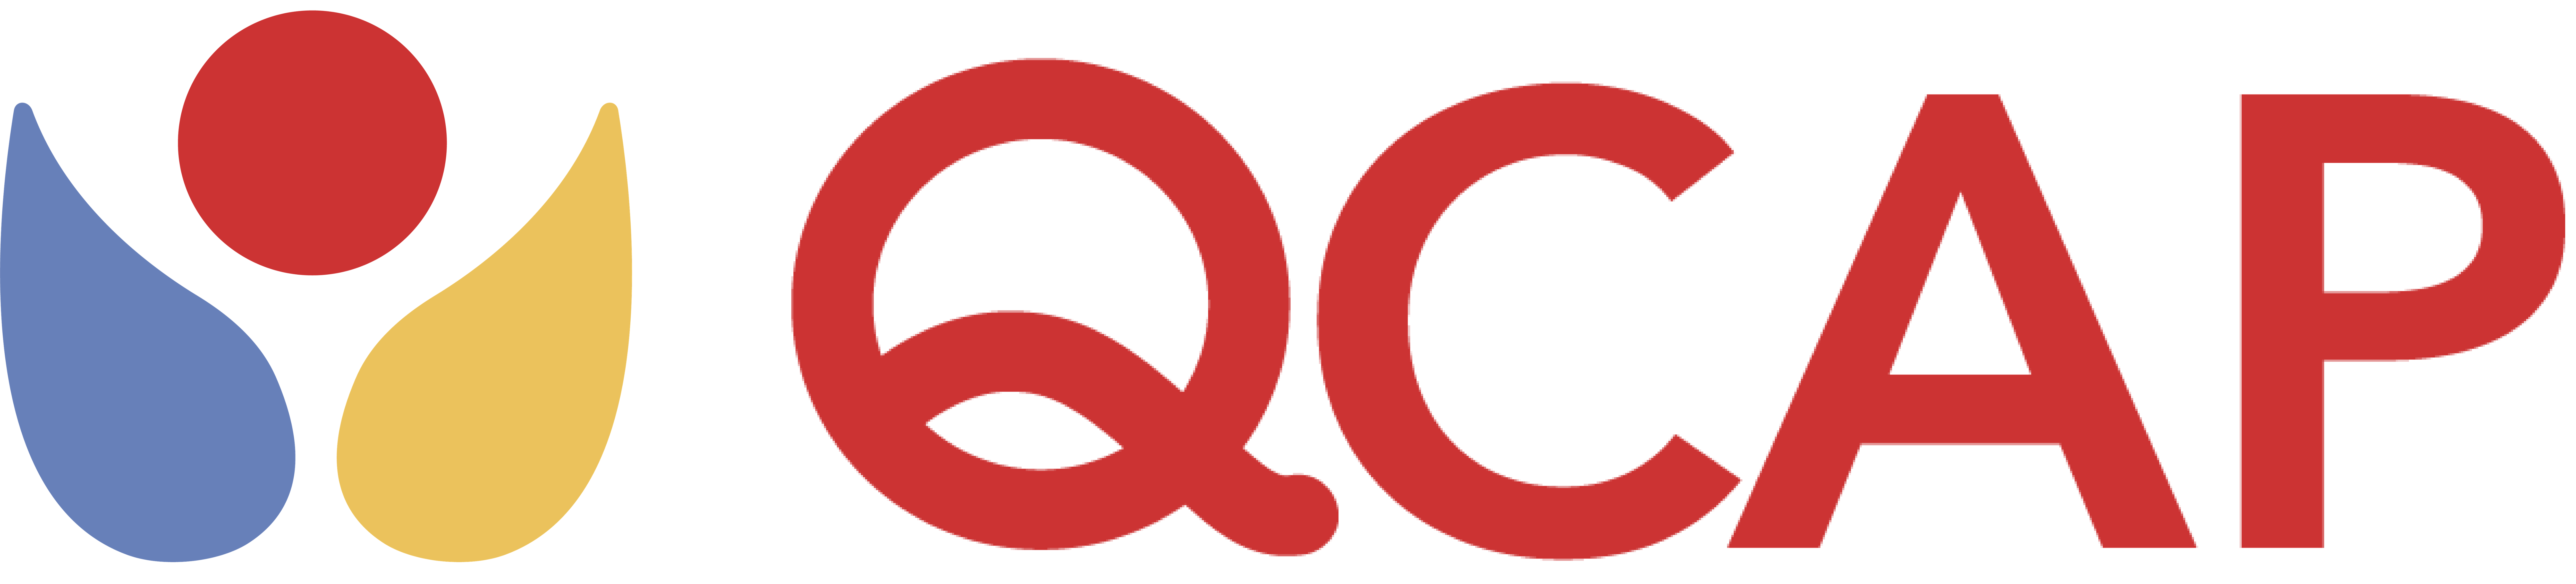 Logo for QCAP. The emblem appears to be an abstract person with a red circle for the head and blue and yellow leaf-like arms.